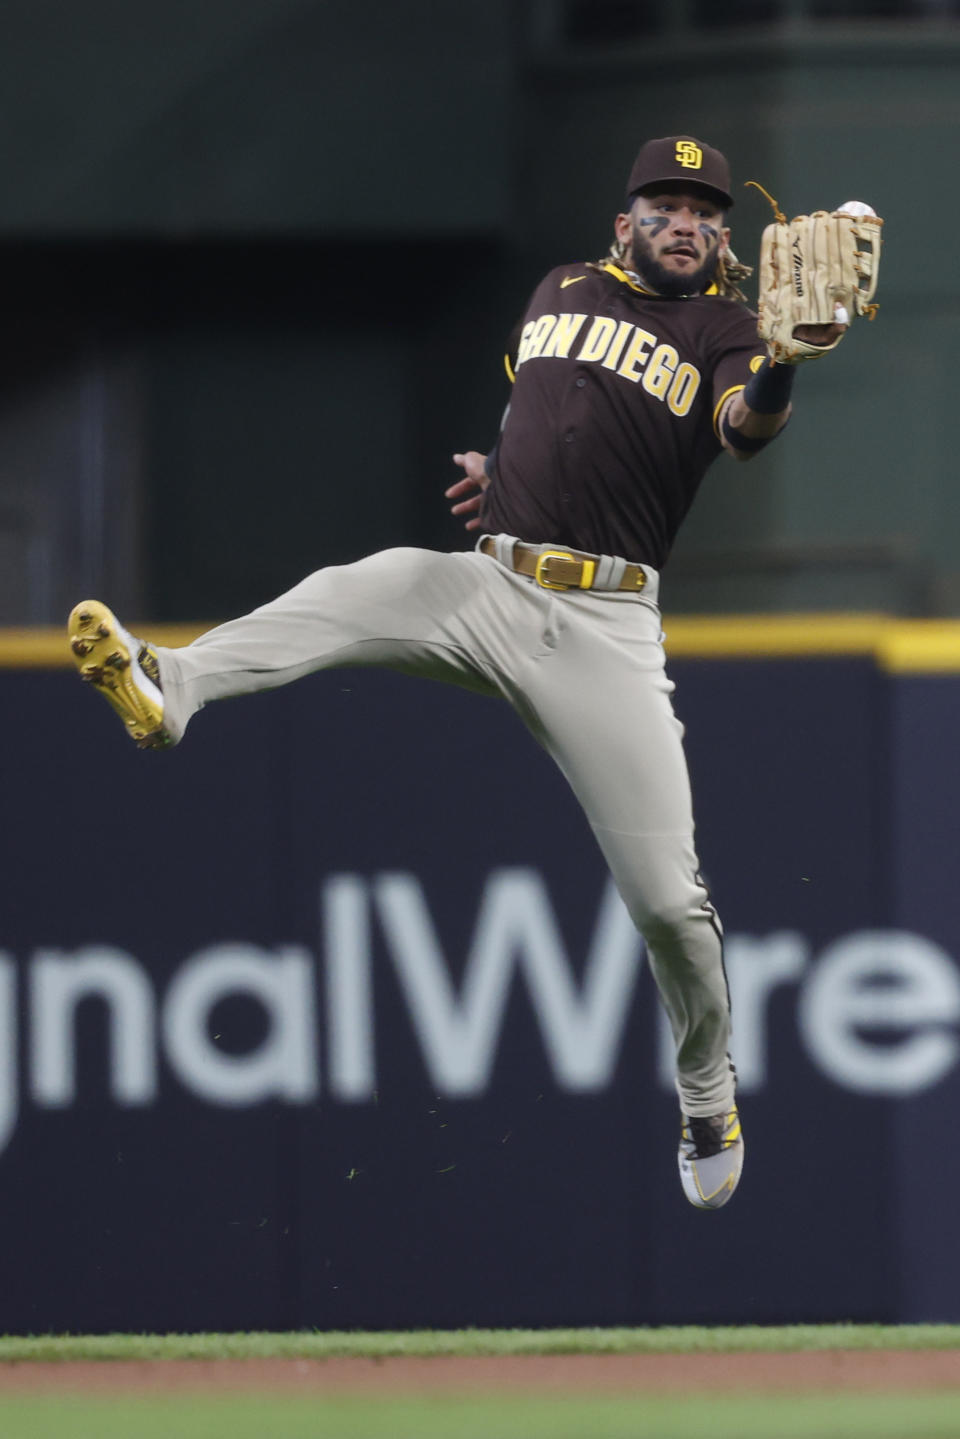 San Diego Padres shortstop Fernando Tatis Jr. makes a leaping catch on a ball hit by Milwaukee Brewers' Daniel Robertson during the second inning of a baseball game Thursday, May 27, 2021, in Milwaukee. (AP Photo/Jeffrey Phelps)